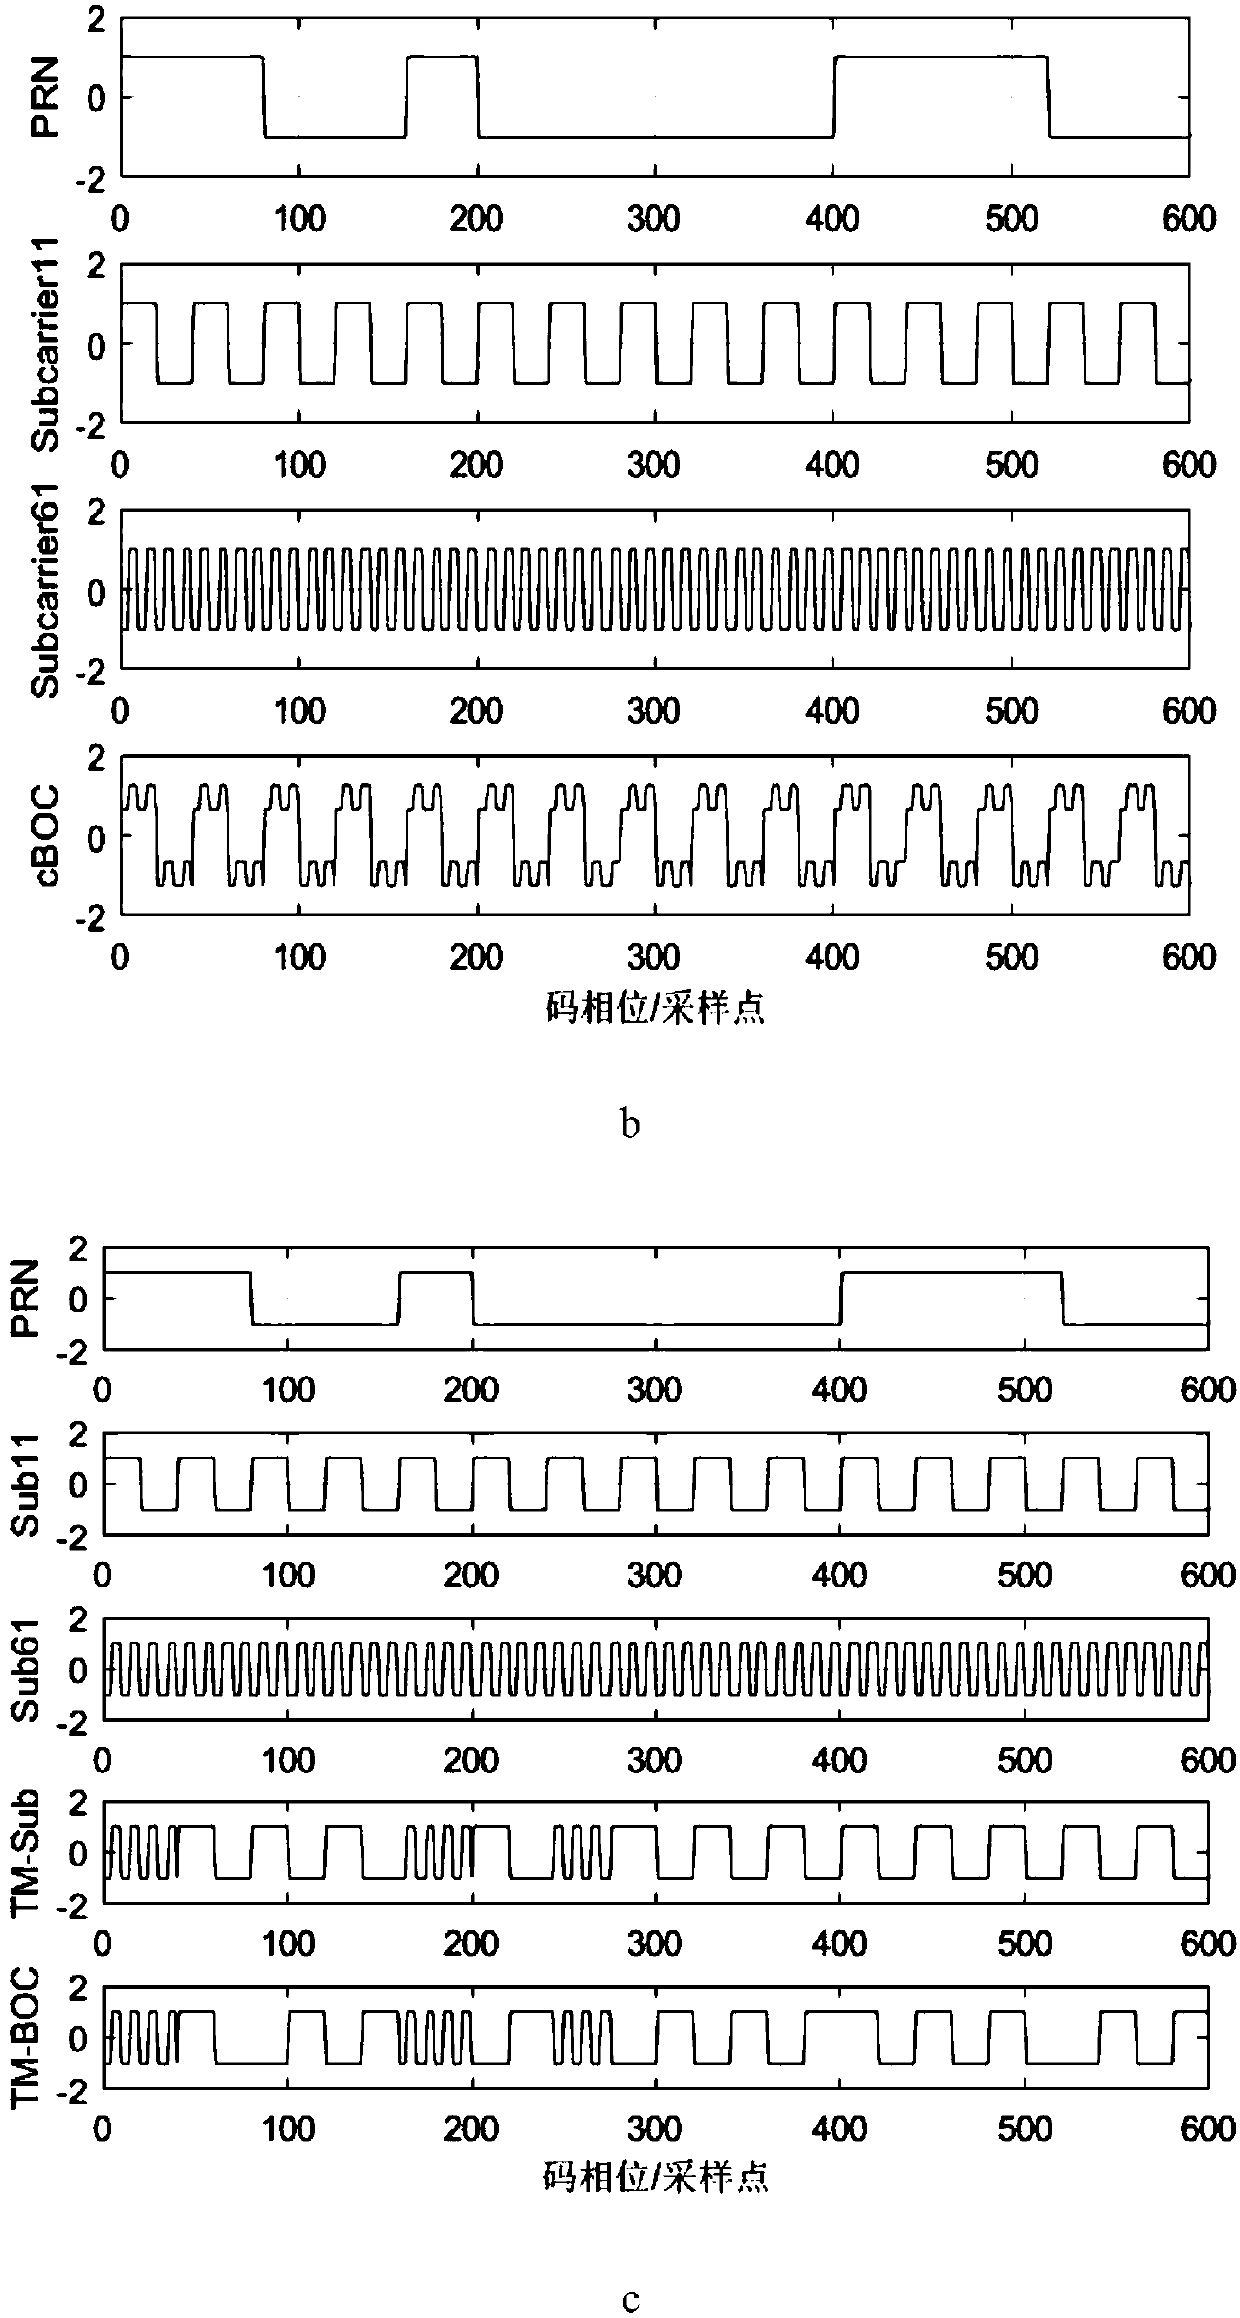 Non-ambiguity capturing method and device applicable to BOC (n, n) signals